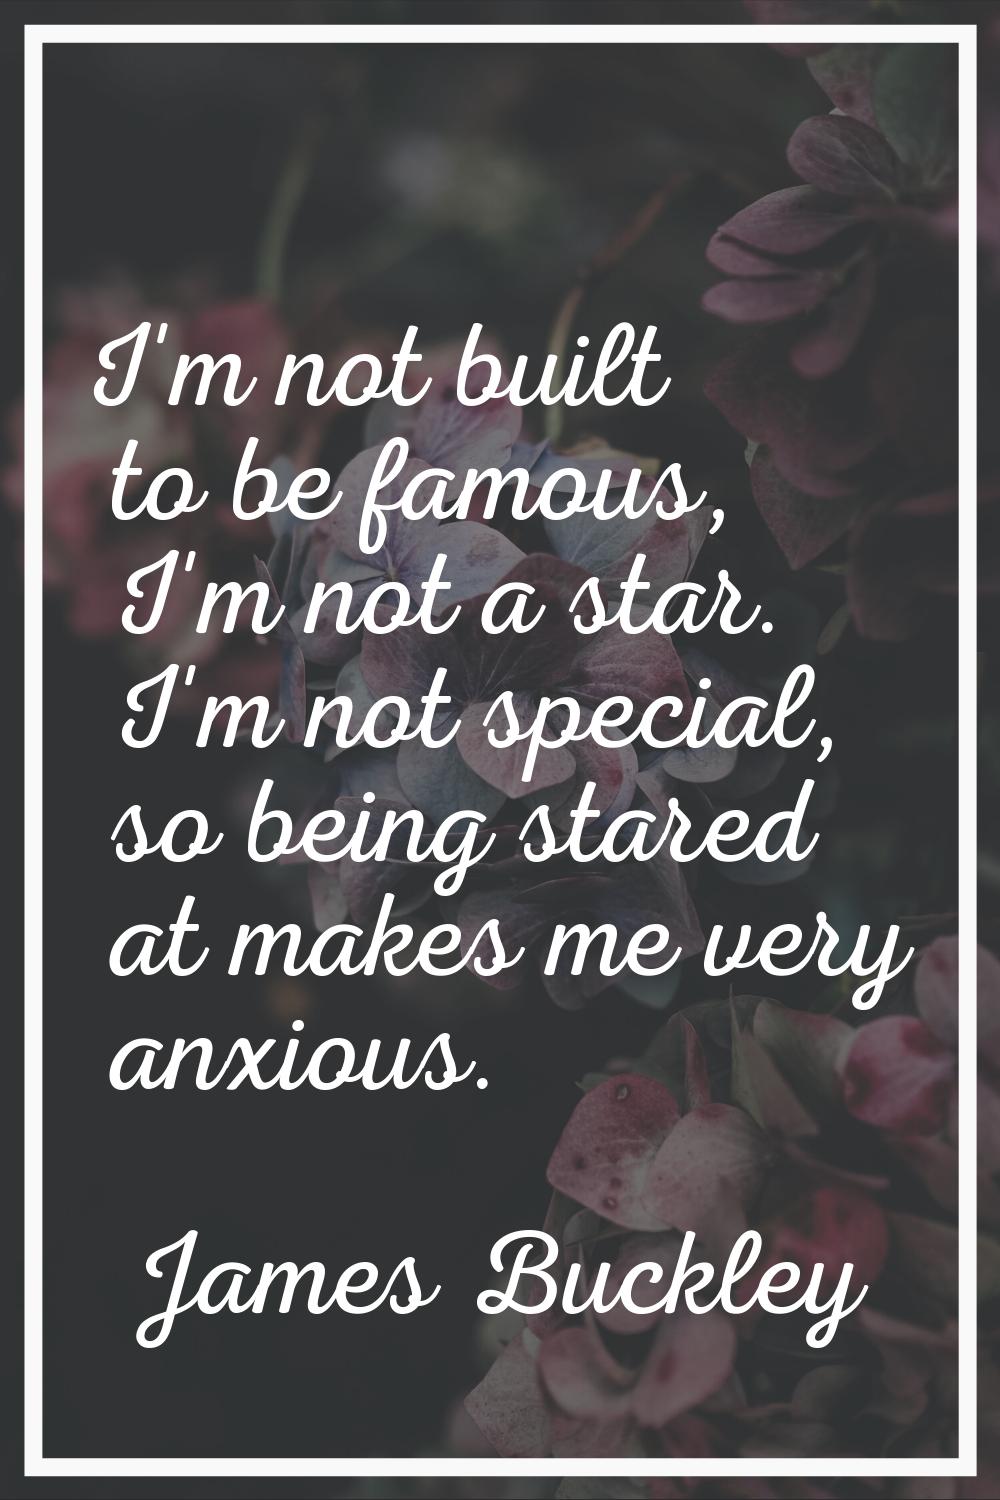 I'm not built to be famous, I'm not a star. I'm not special, so being stared at makes me very anxio